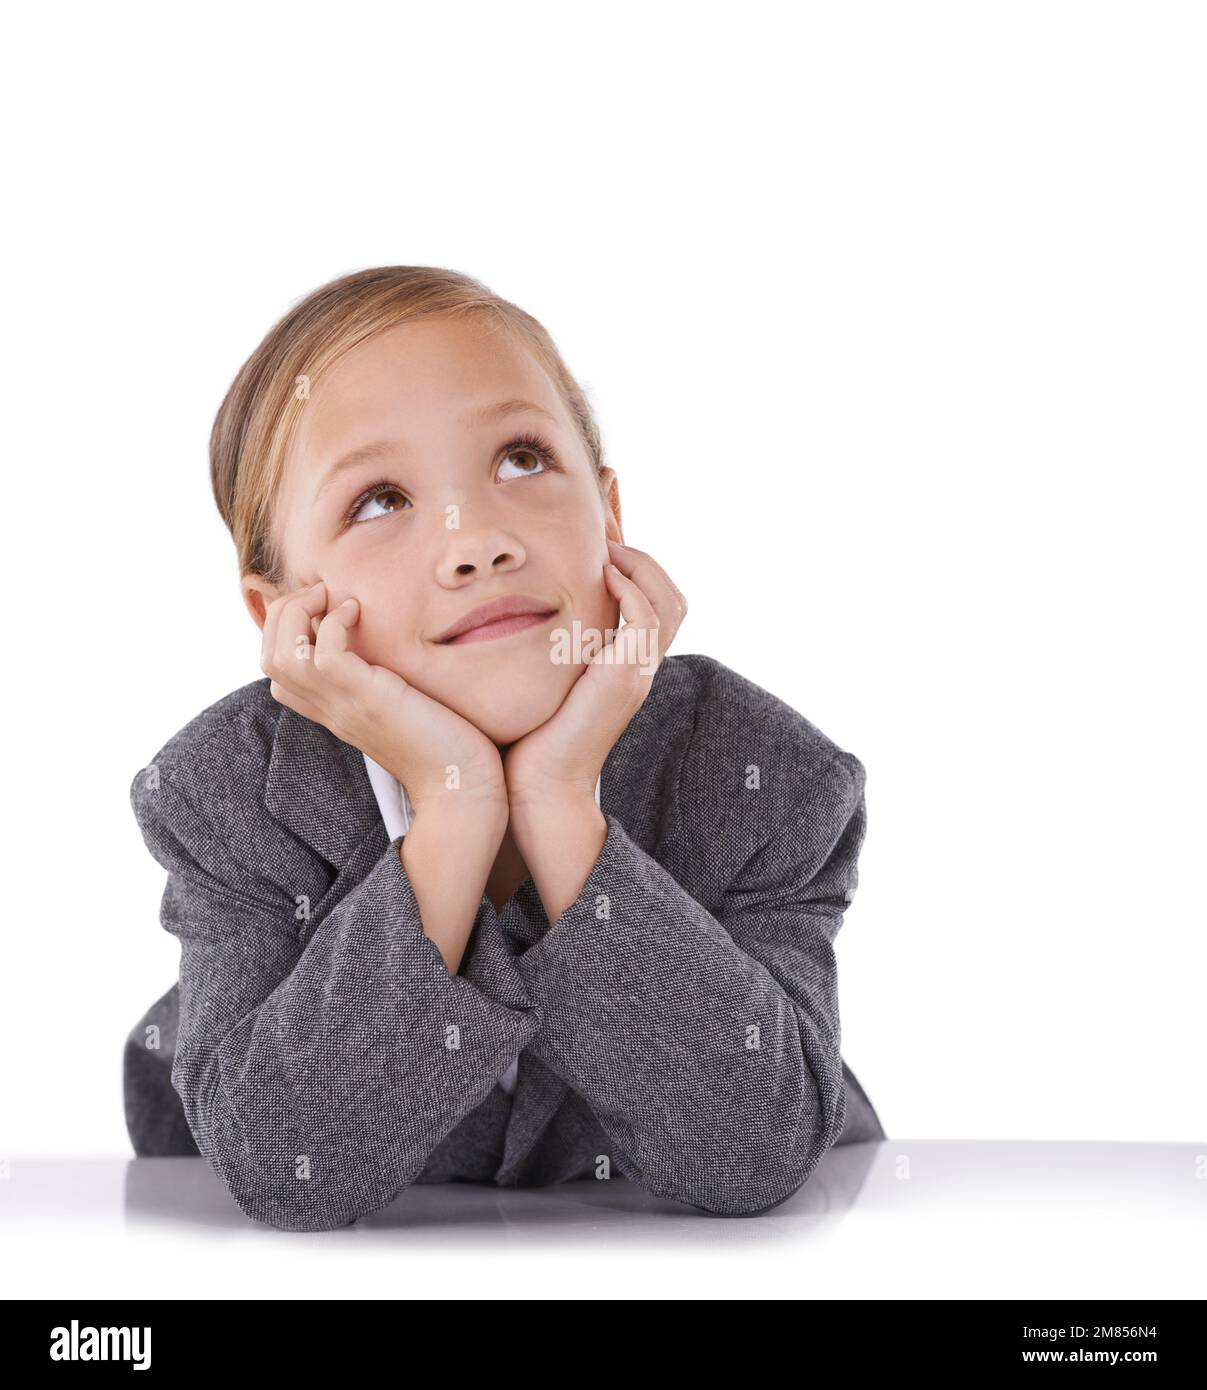 Shes dreaming big already. STudio shot of a cute little girl dressed like a businessperson. Stock Photo